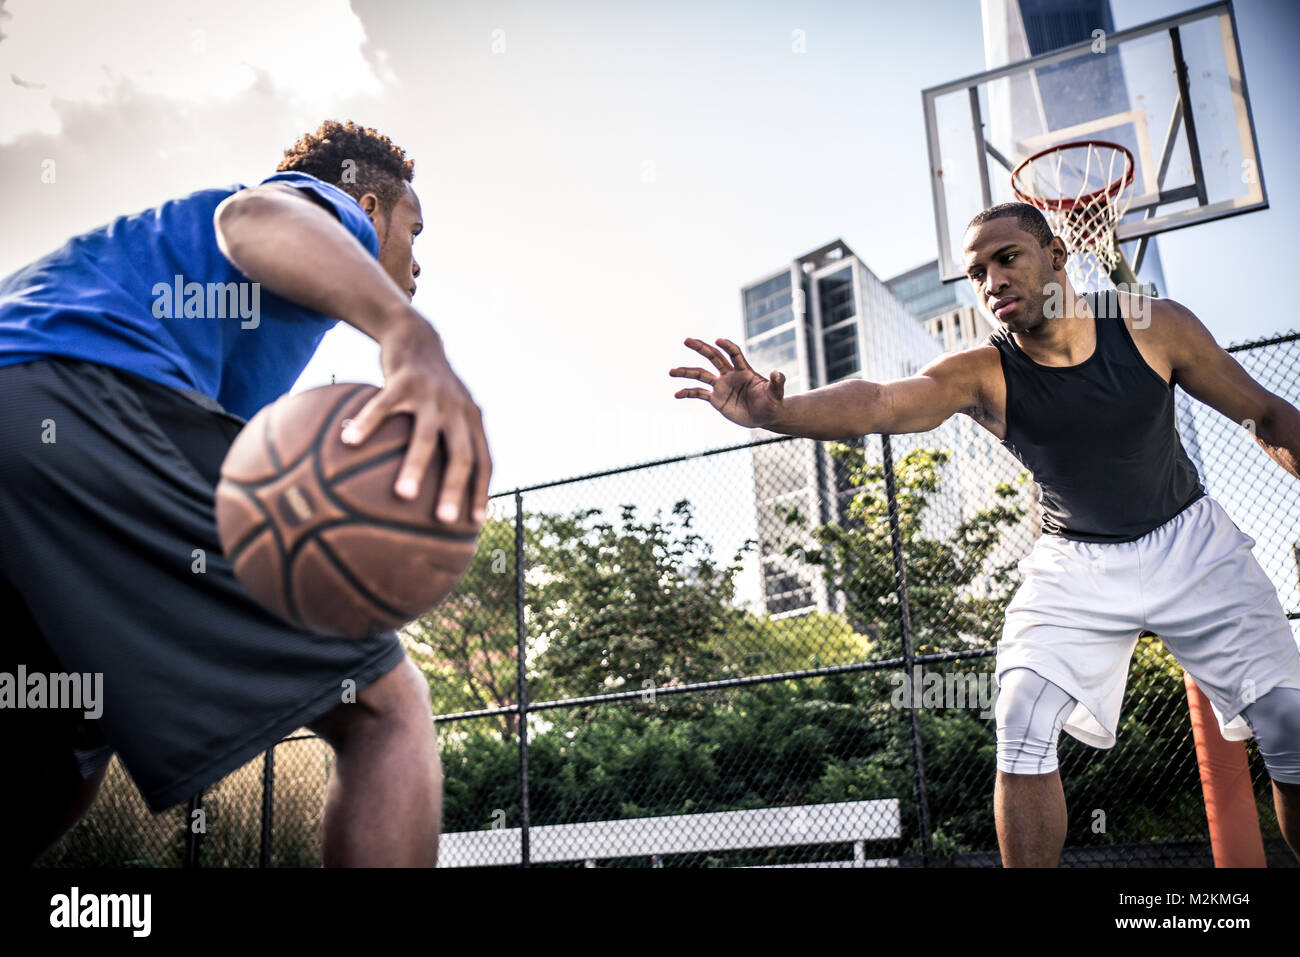 Two street basketball players playing hard on the court Stock